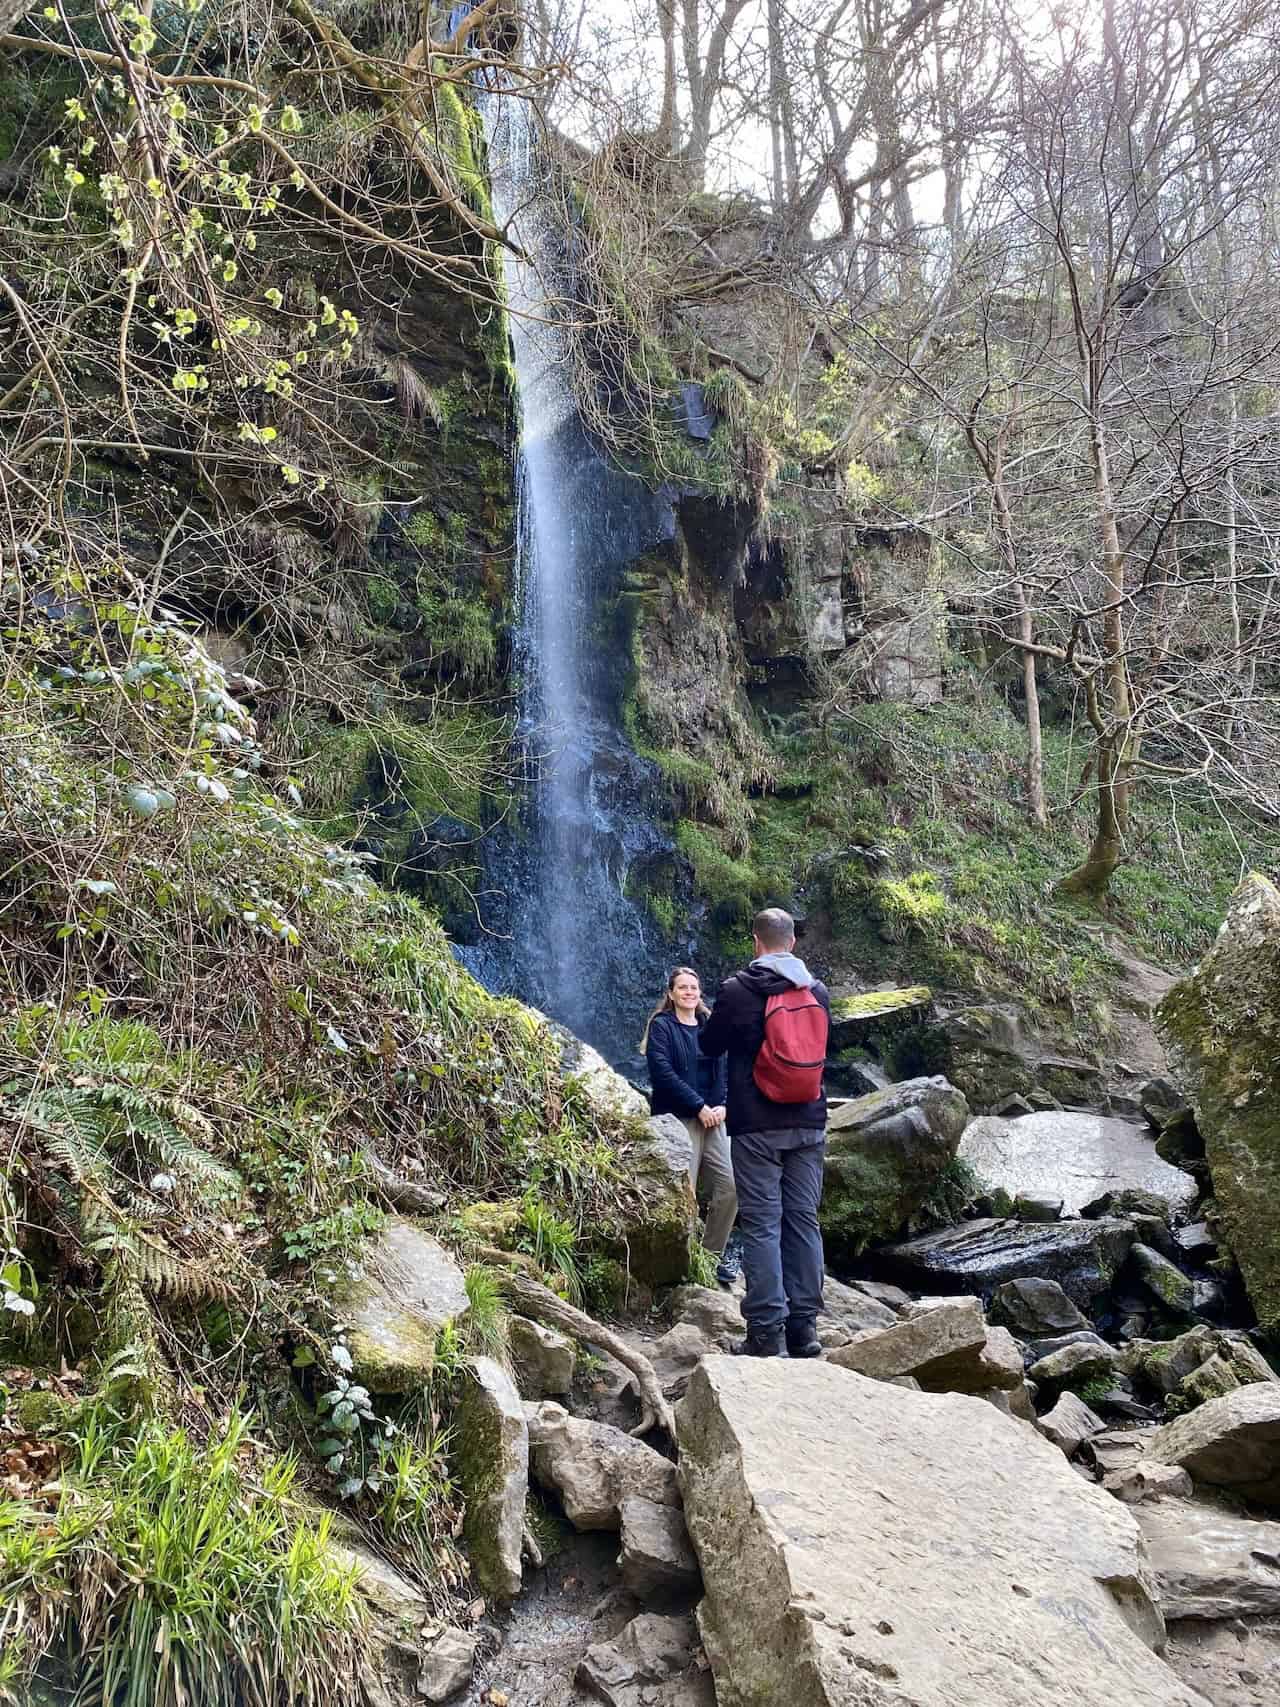 Mallyan Spout Waterfall, the tallest waterfall in the North York Moors, drops 70 feet (21 metres).